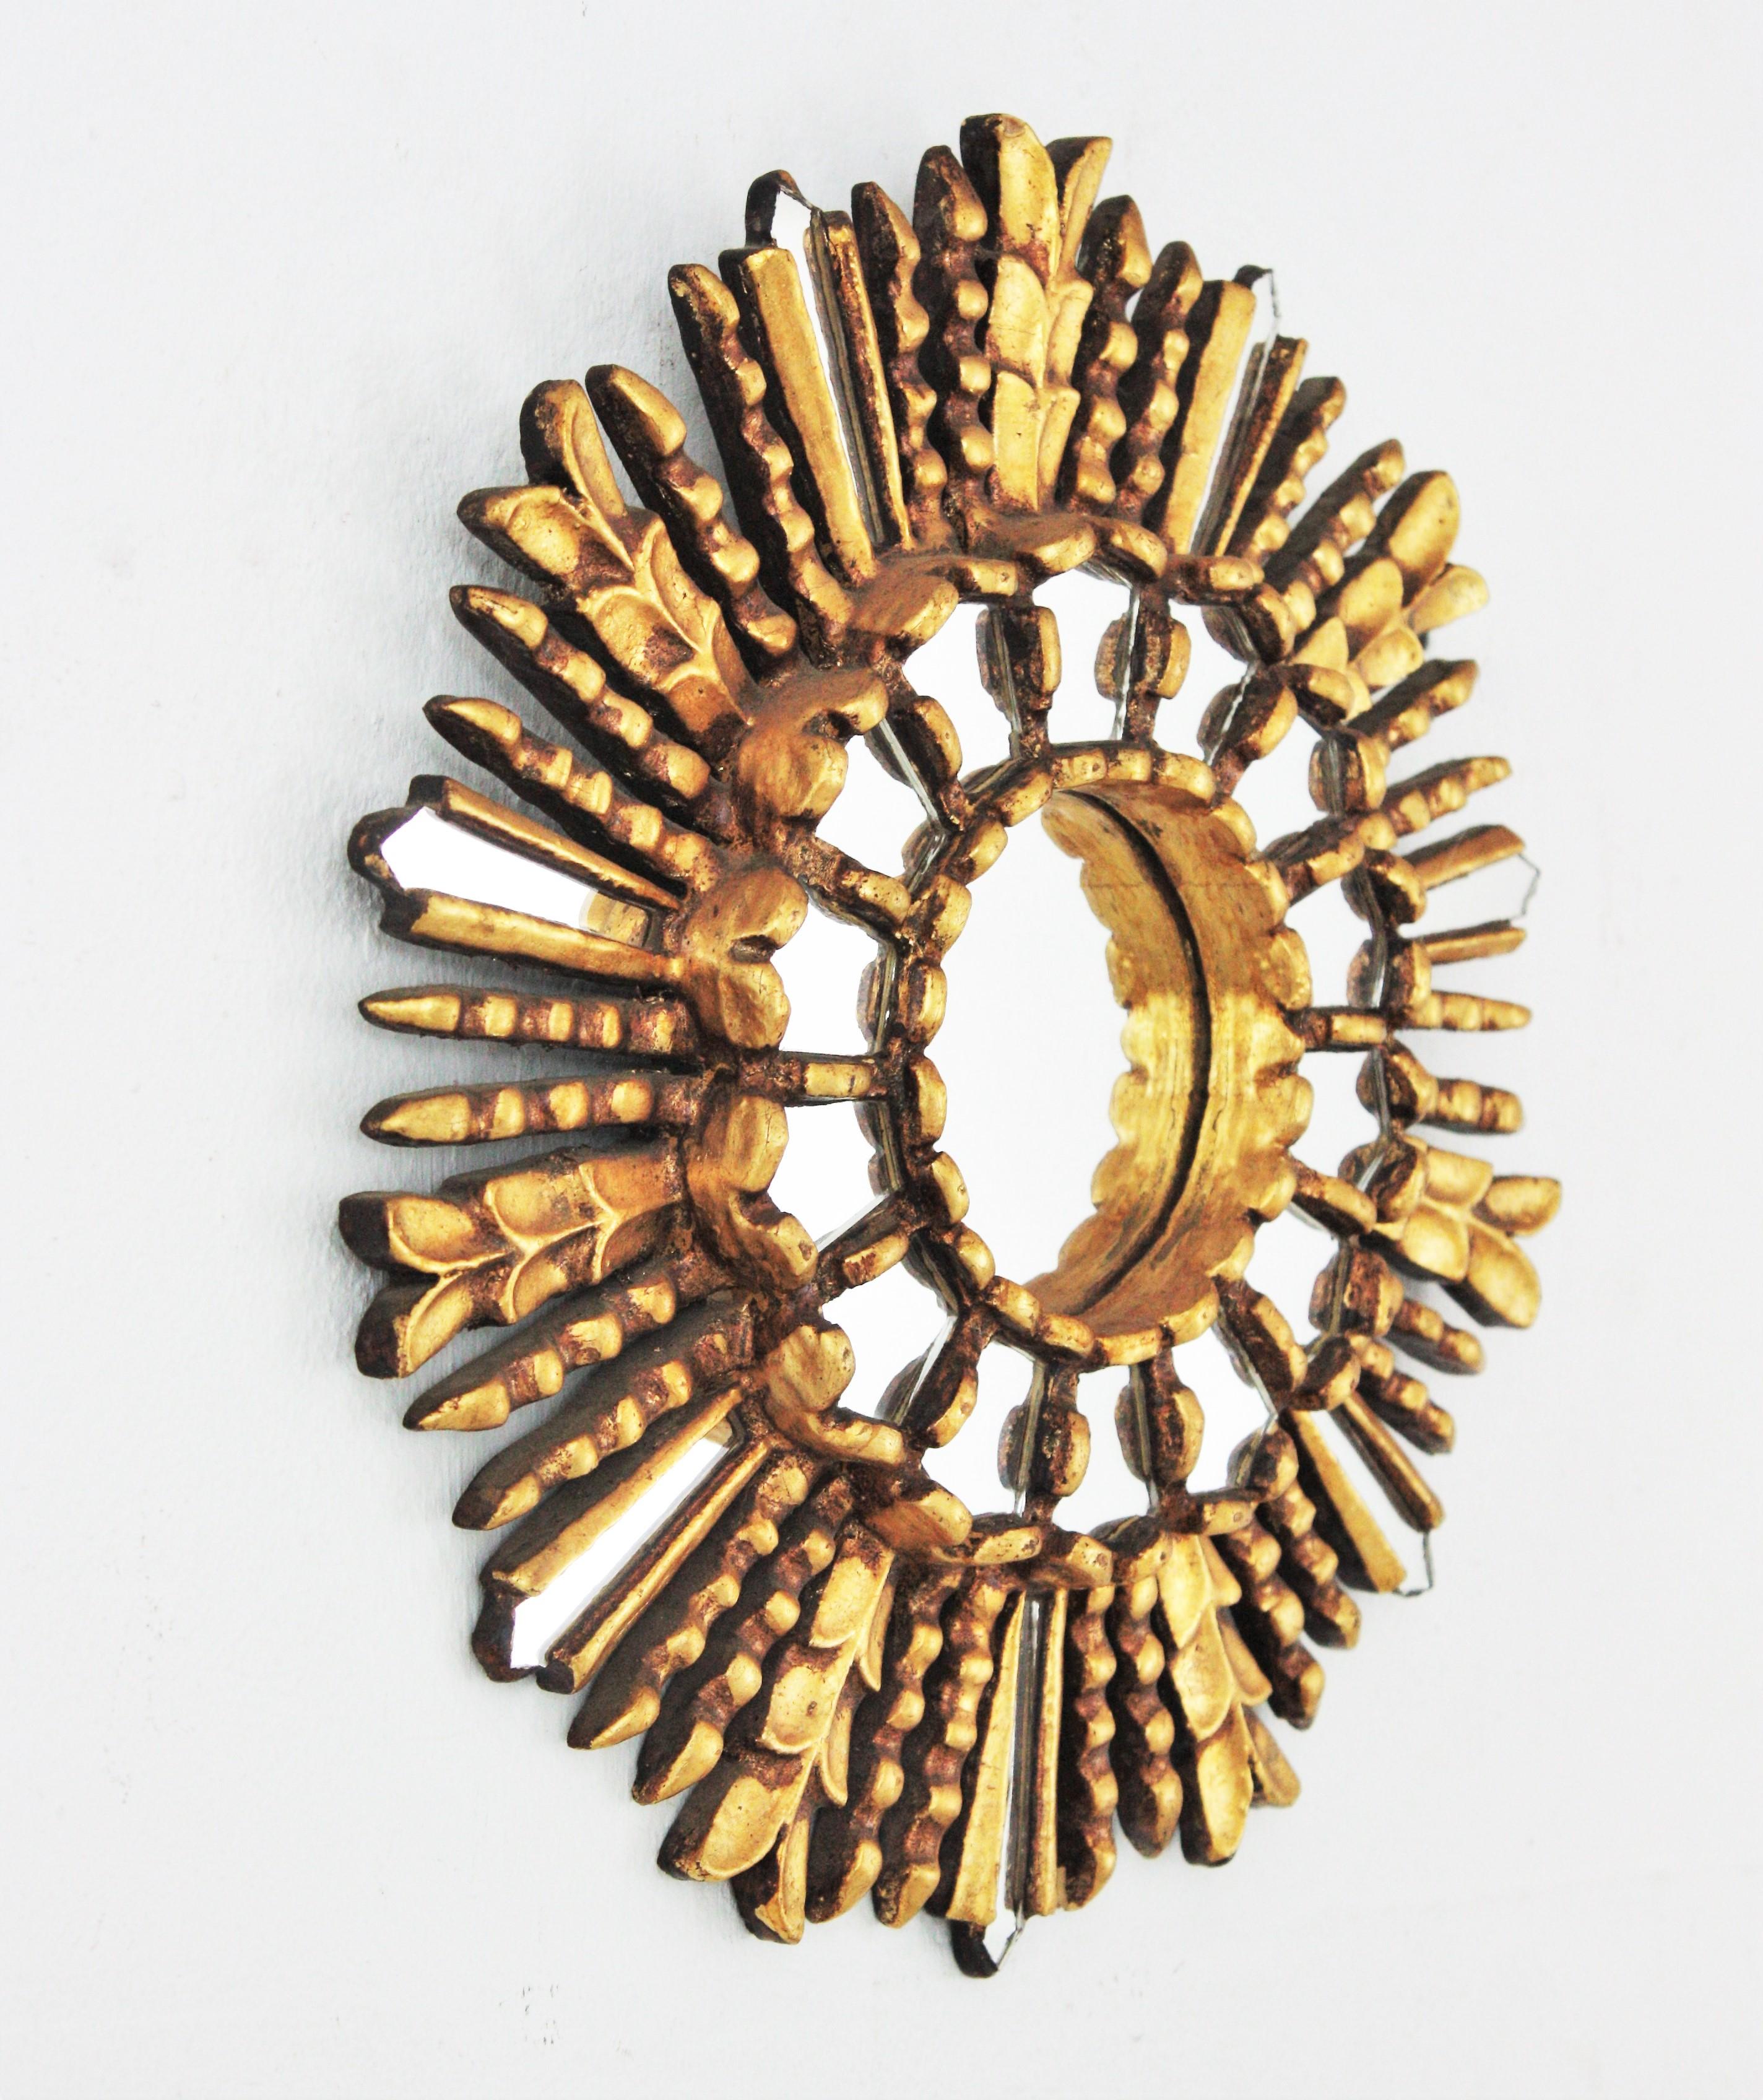 Spanish Sunburst Mirror in Giltwood with Mirror Insets, 1950s For Sale